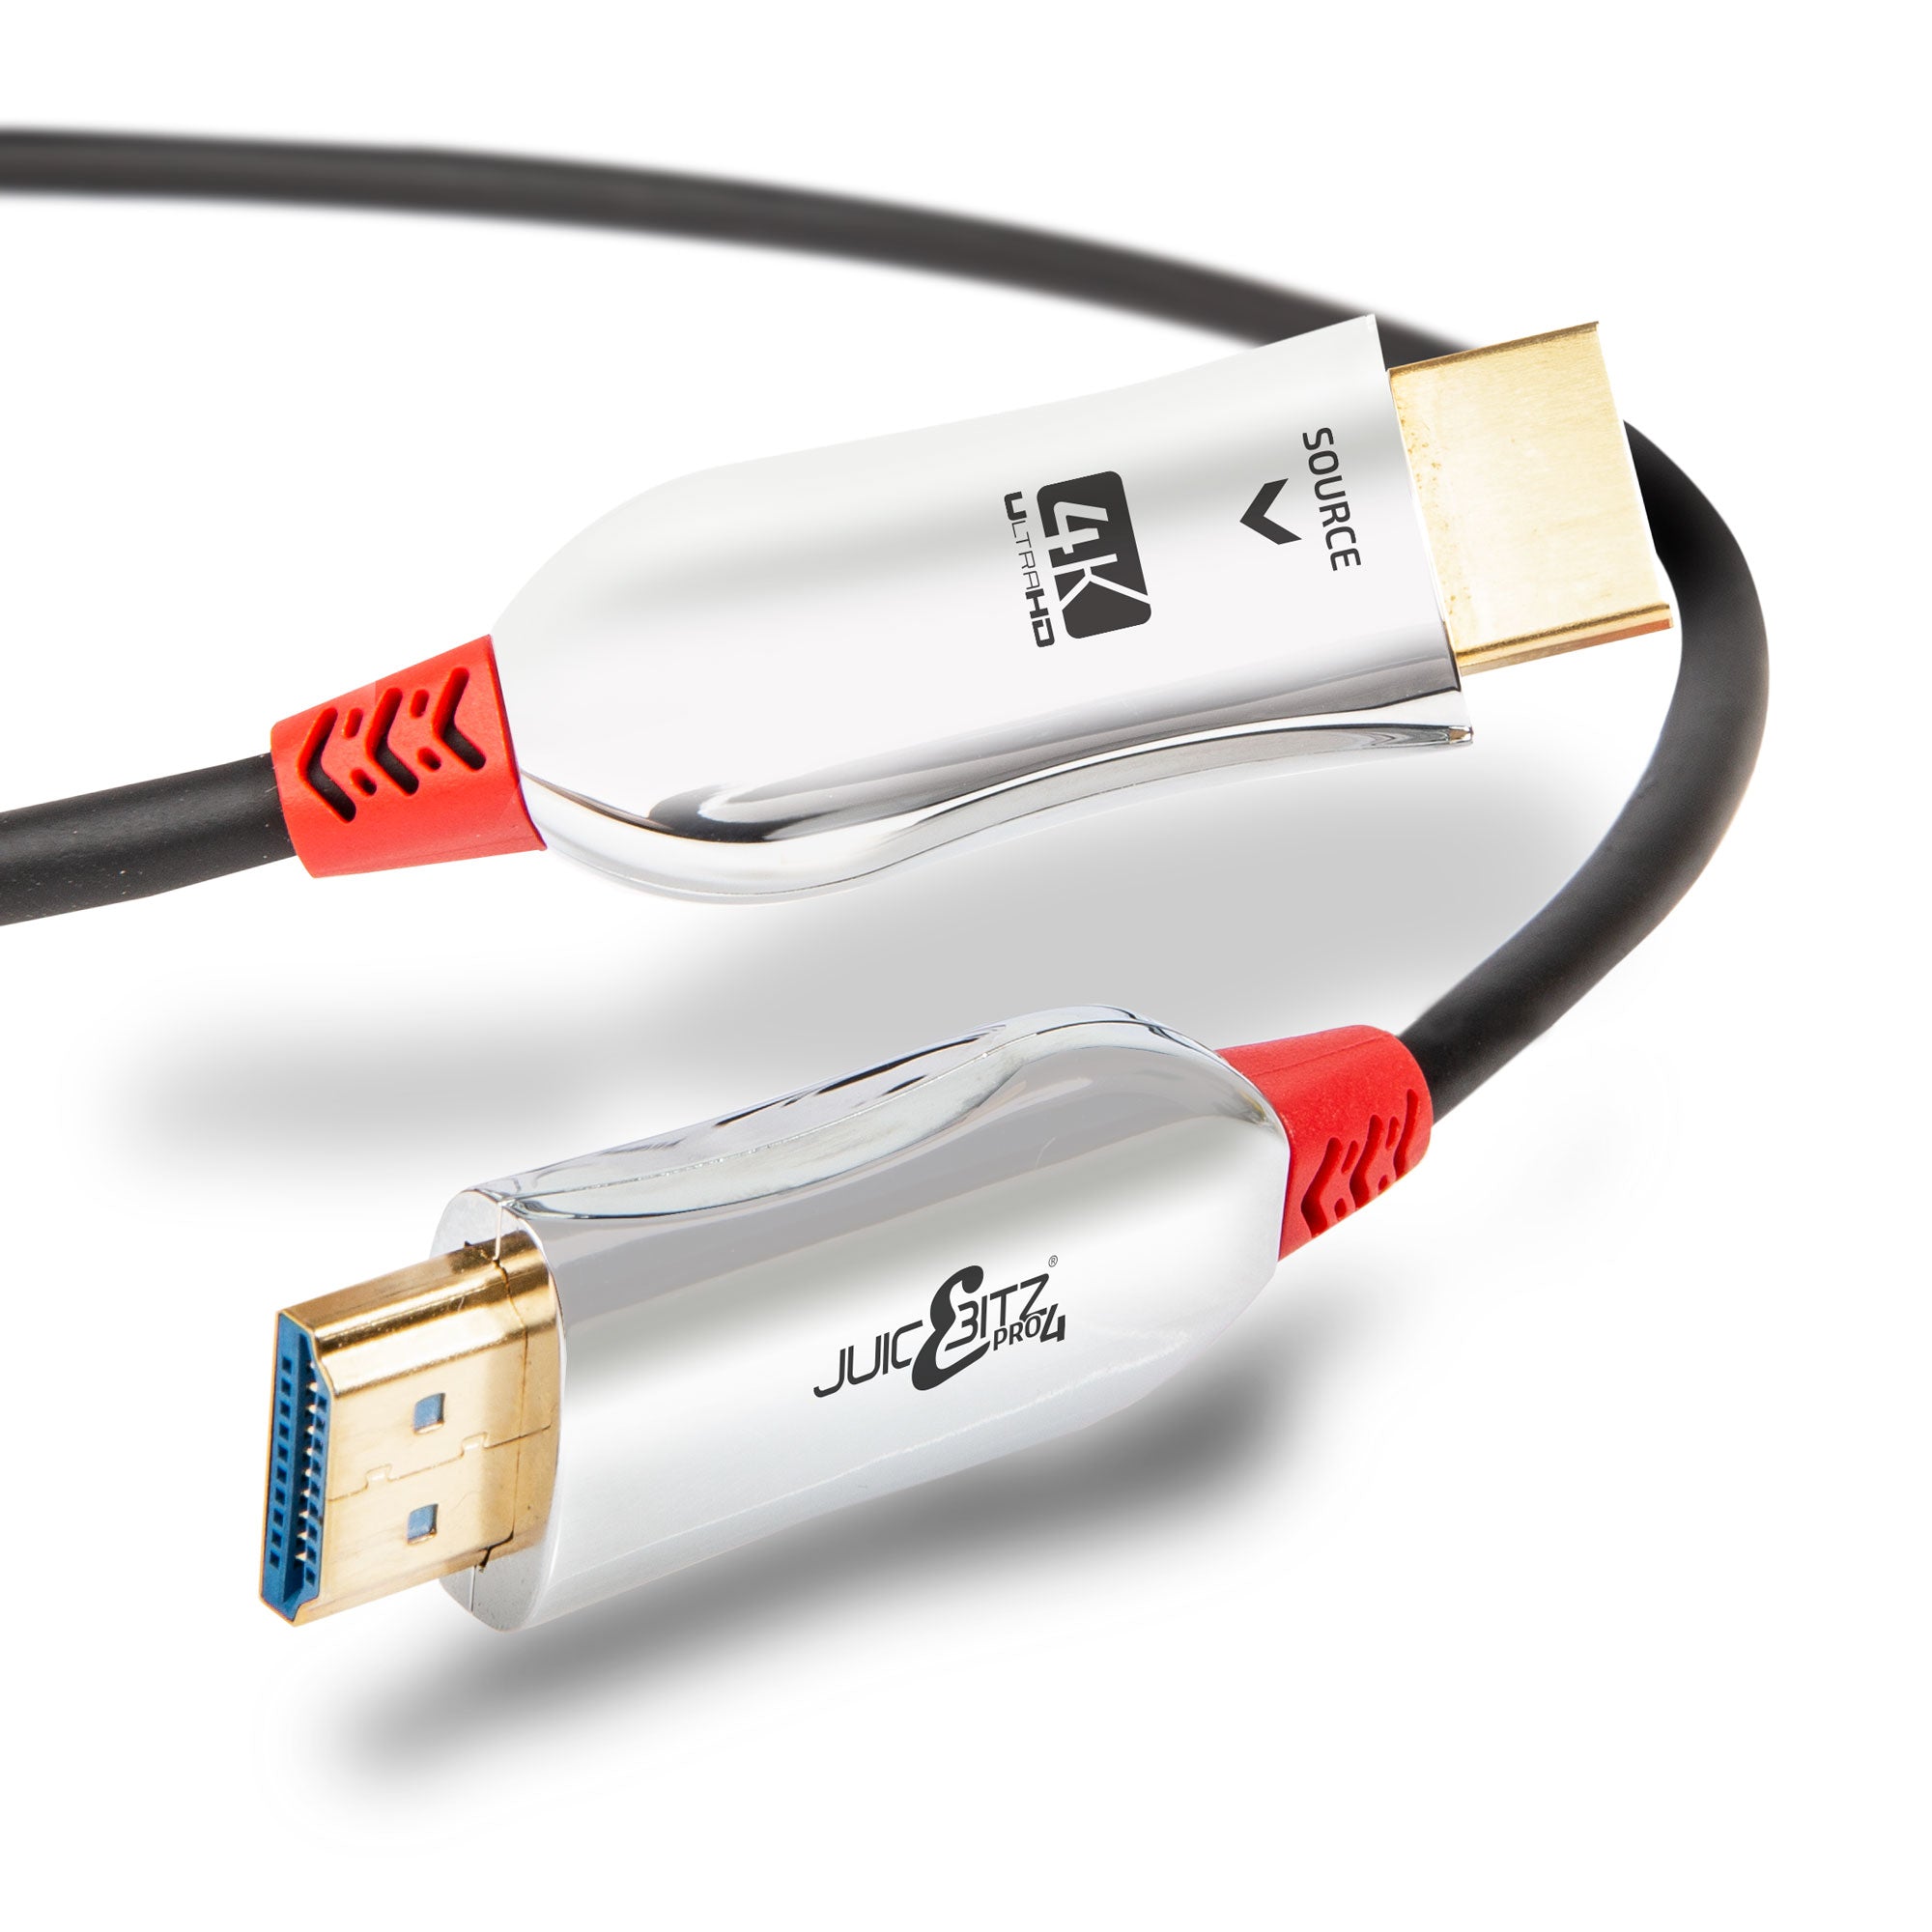 HDMI Cables - 4K & High Speed HDMI Cables